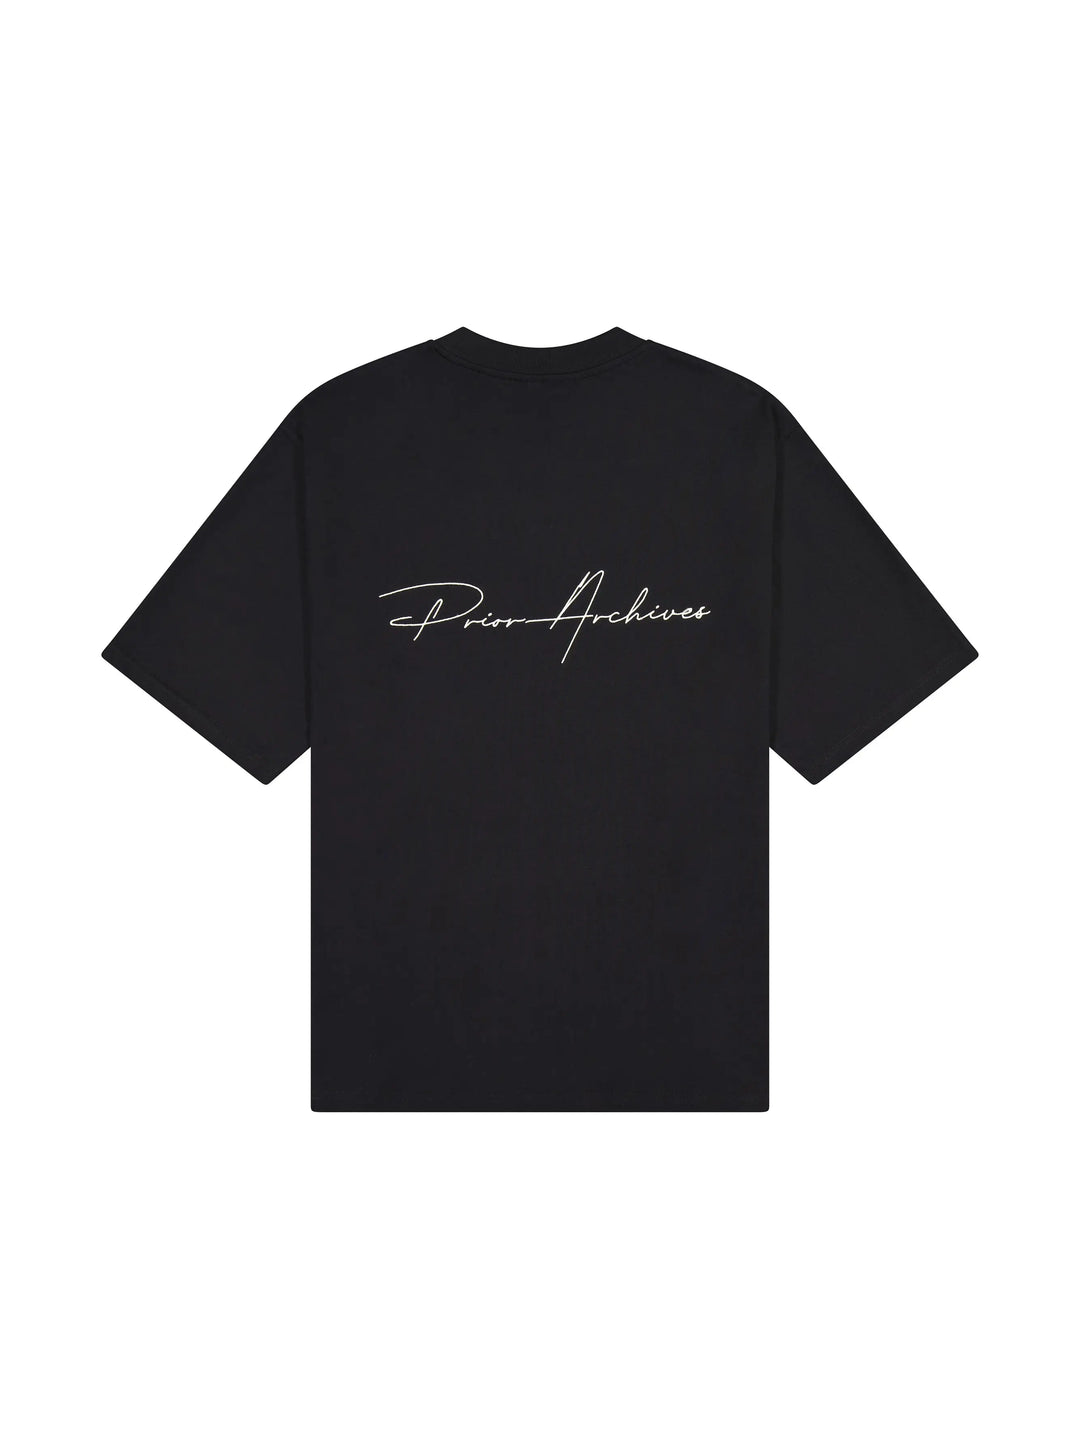 Prior Embroidery Logo Oversized T-shirt Onyx 2.0 (New Sizing) in Melbourne, Australia - Prior